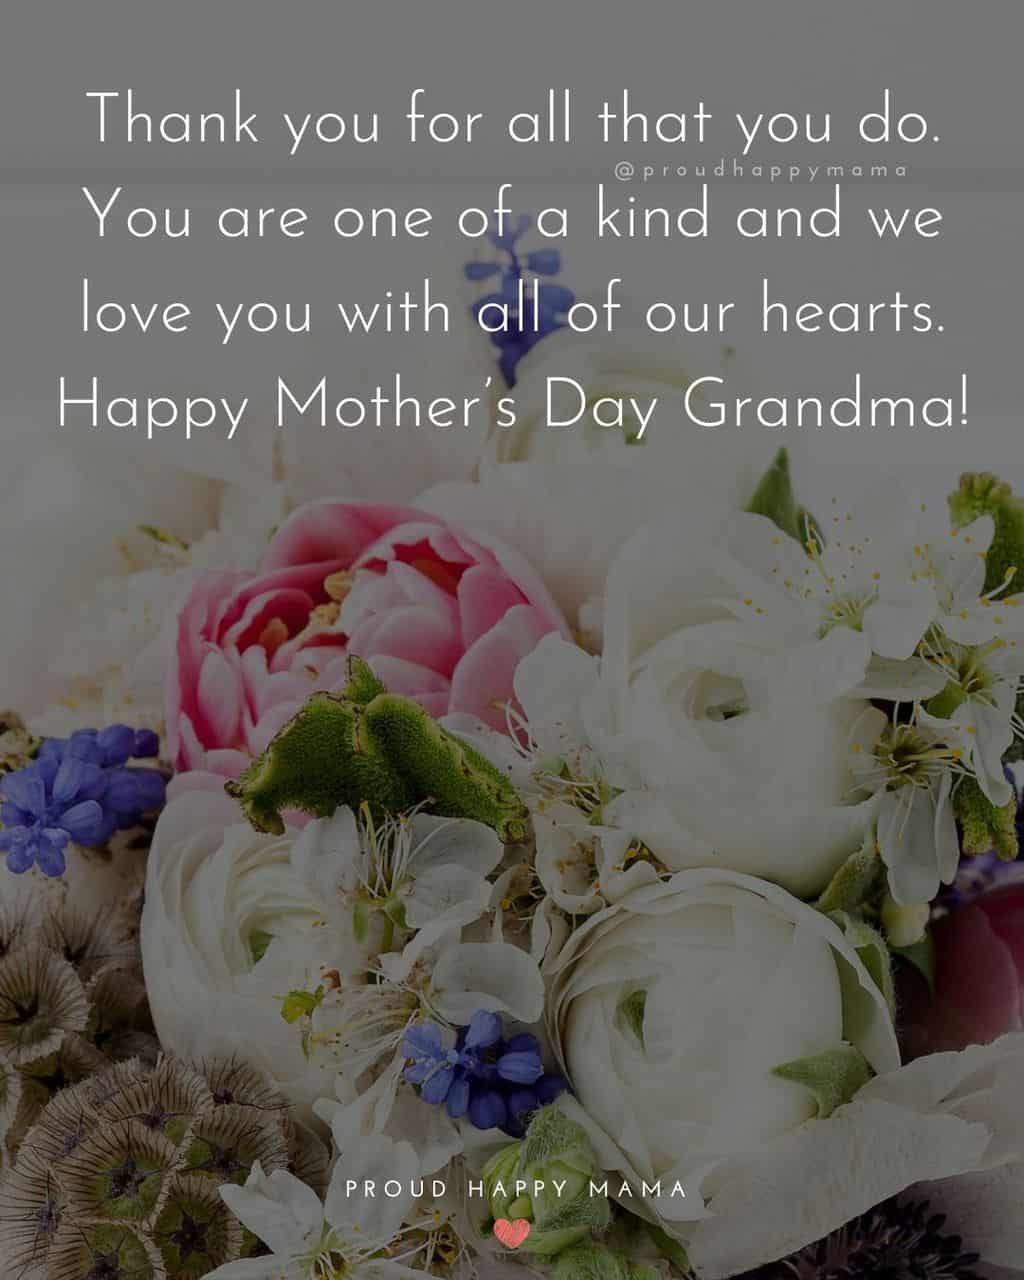 Happy Mothers Day Quotes To Grandma - Thank you for all that you do. You are one of a kind and we love you with all of our